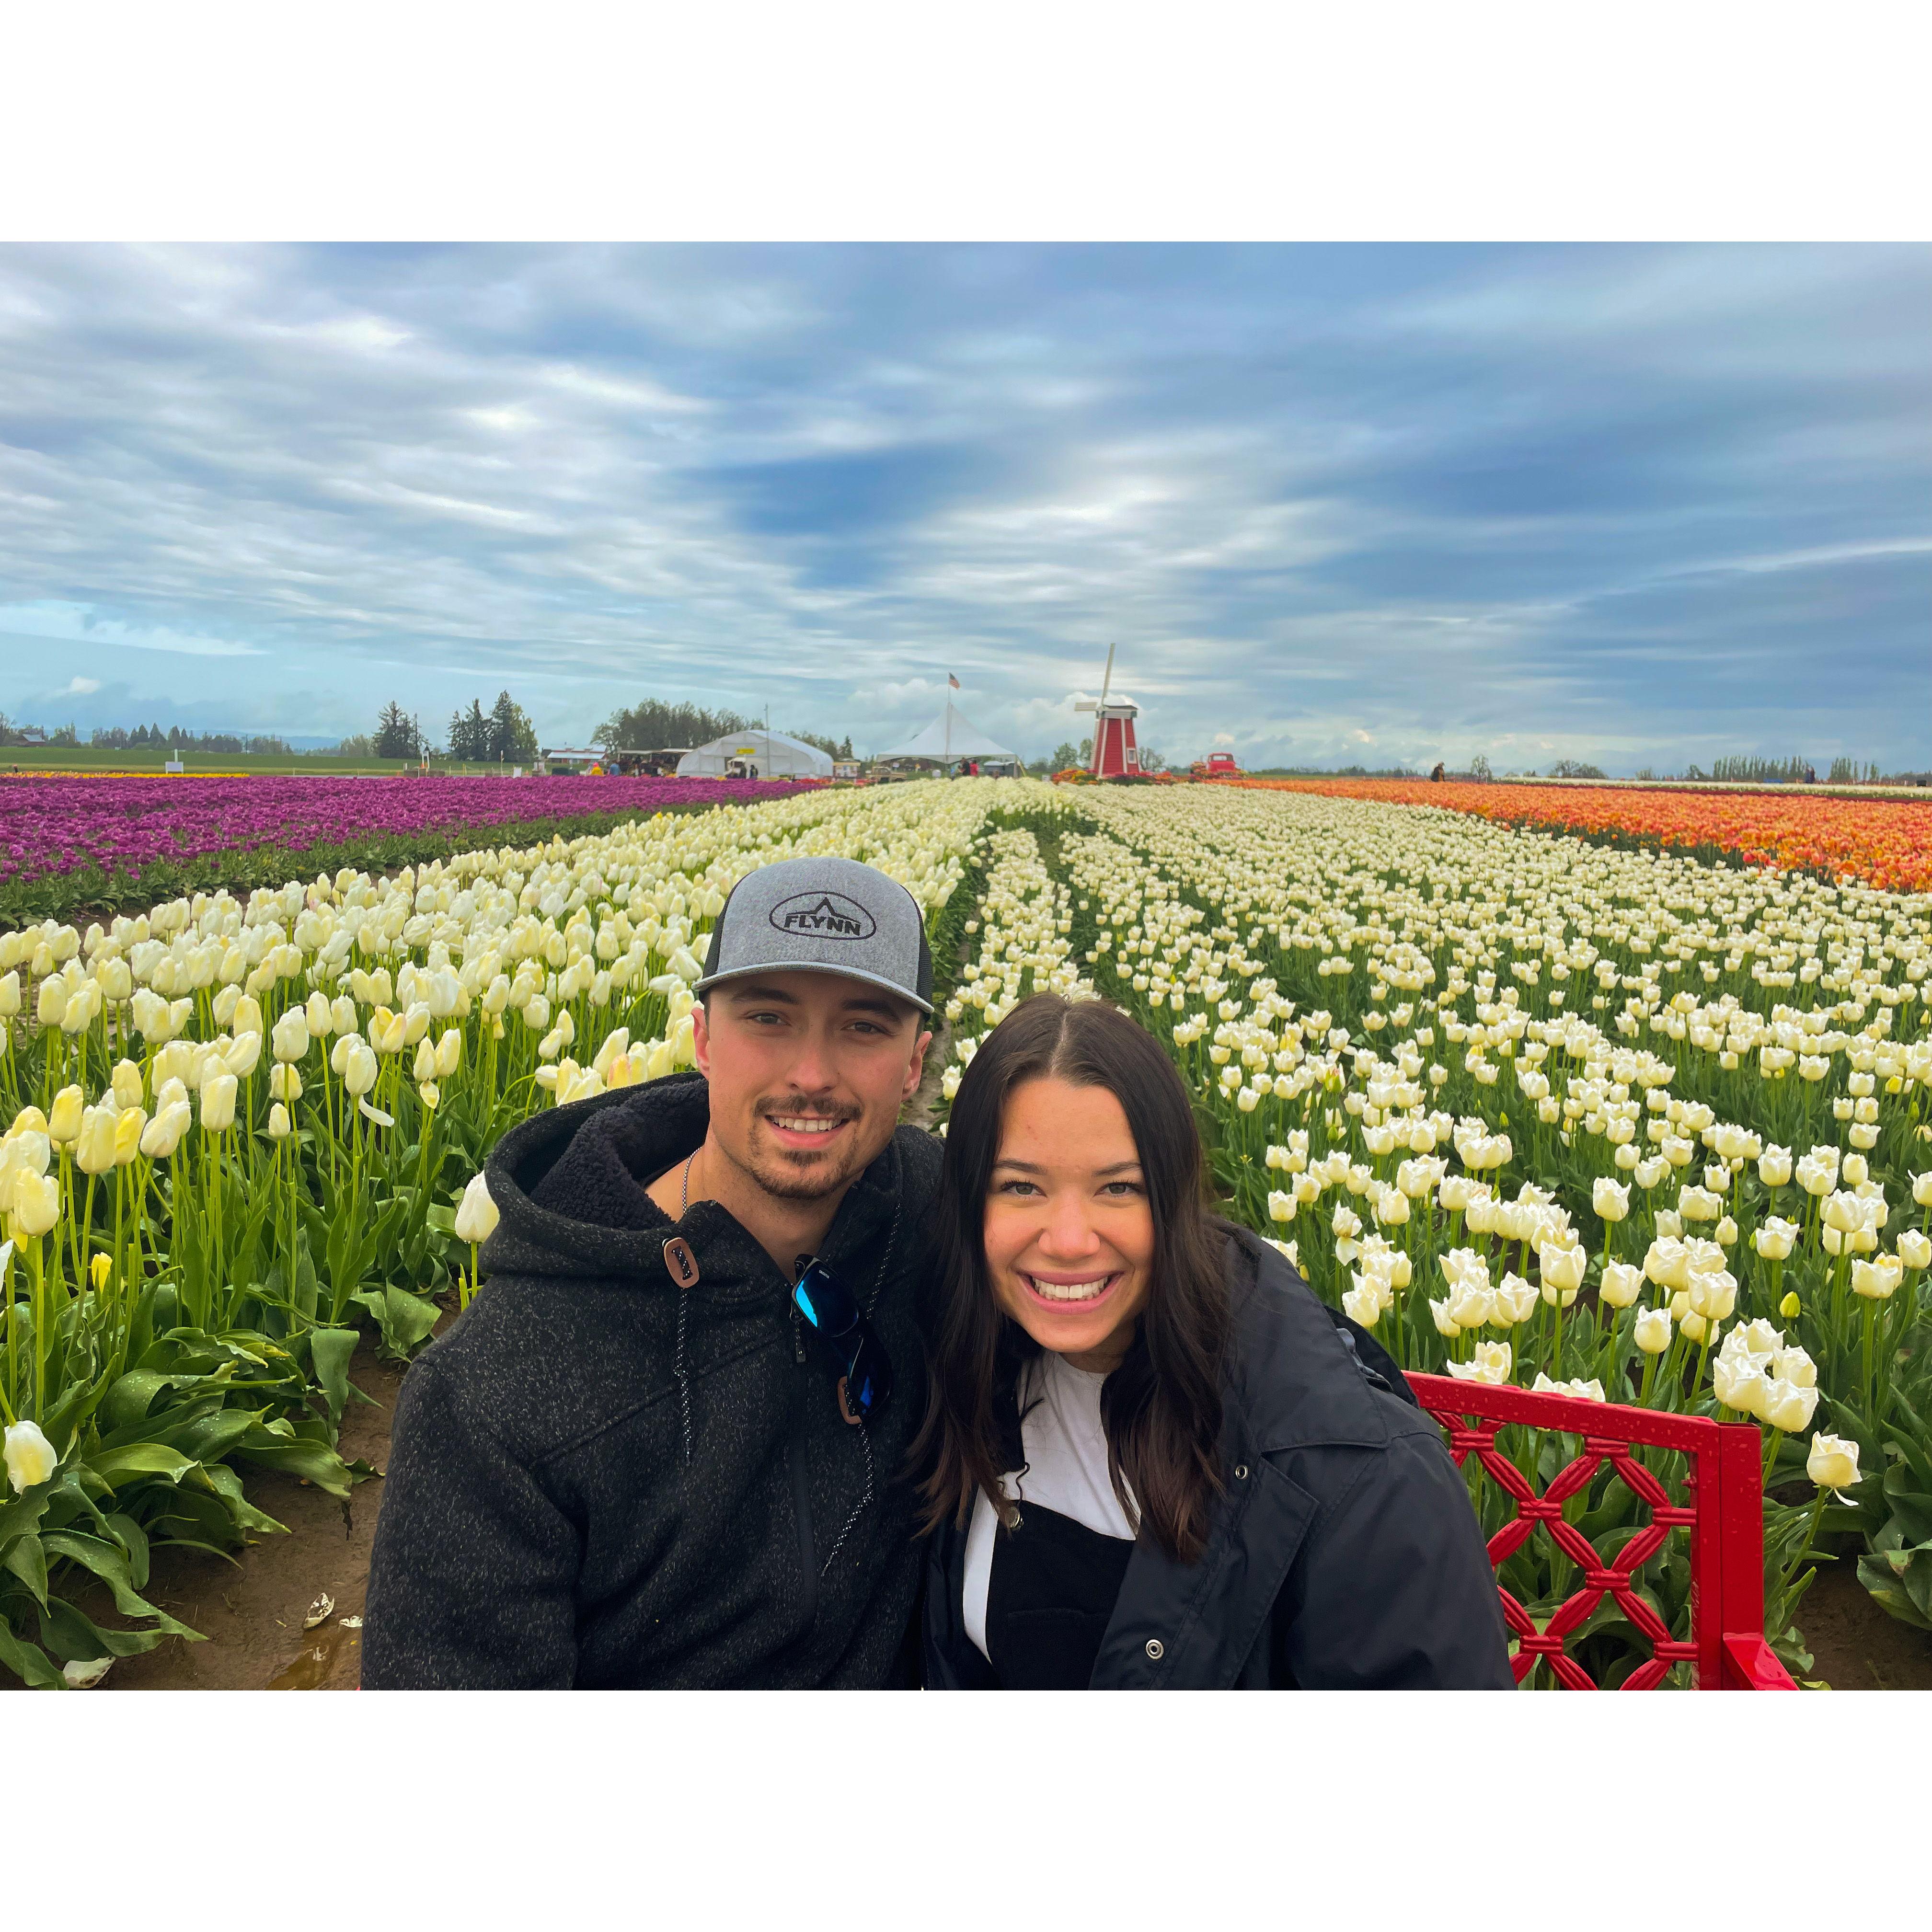 Woodenshoe Tulip Festival because he knows flowers make me happy